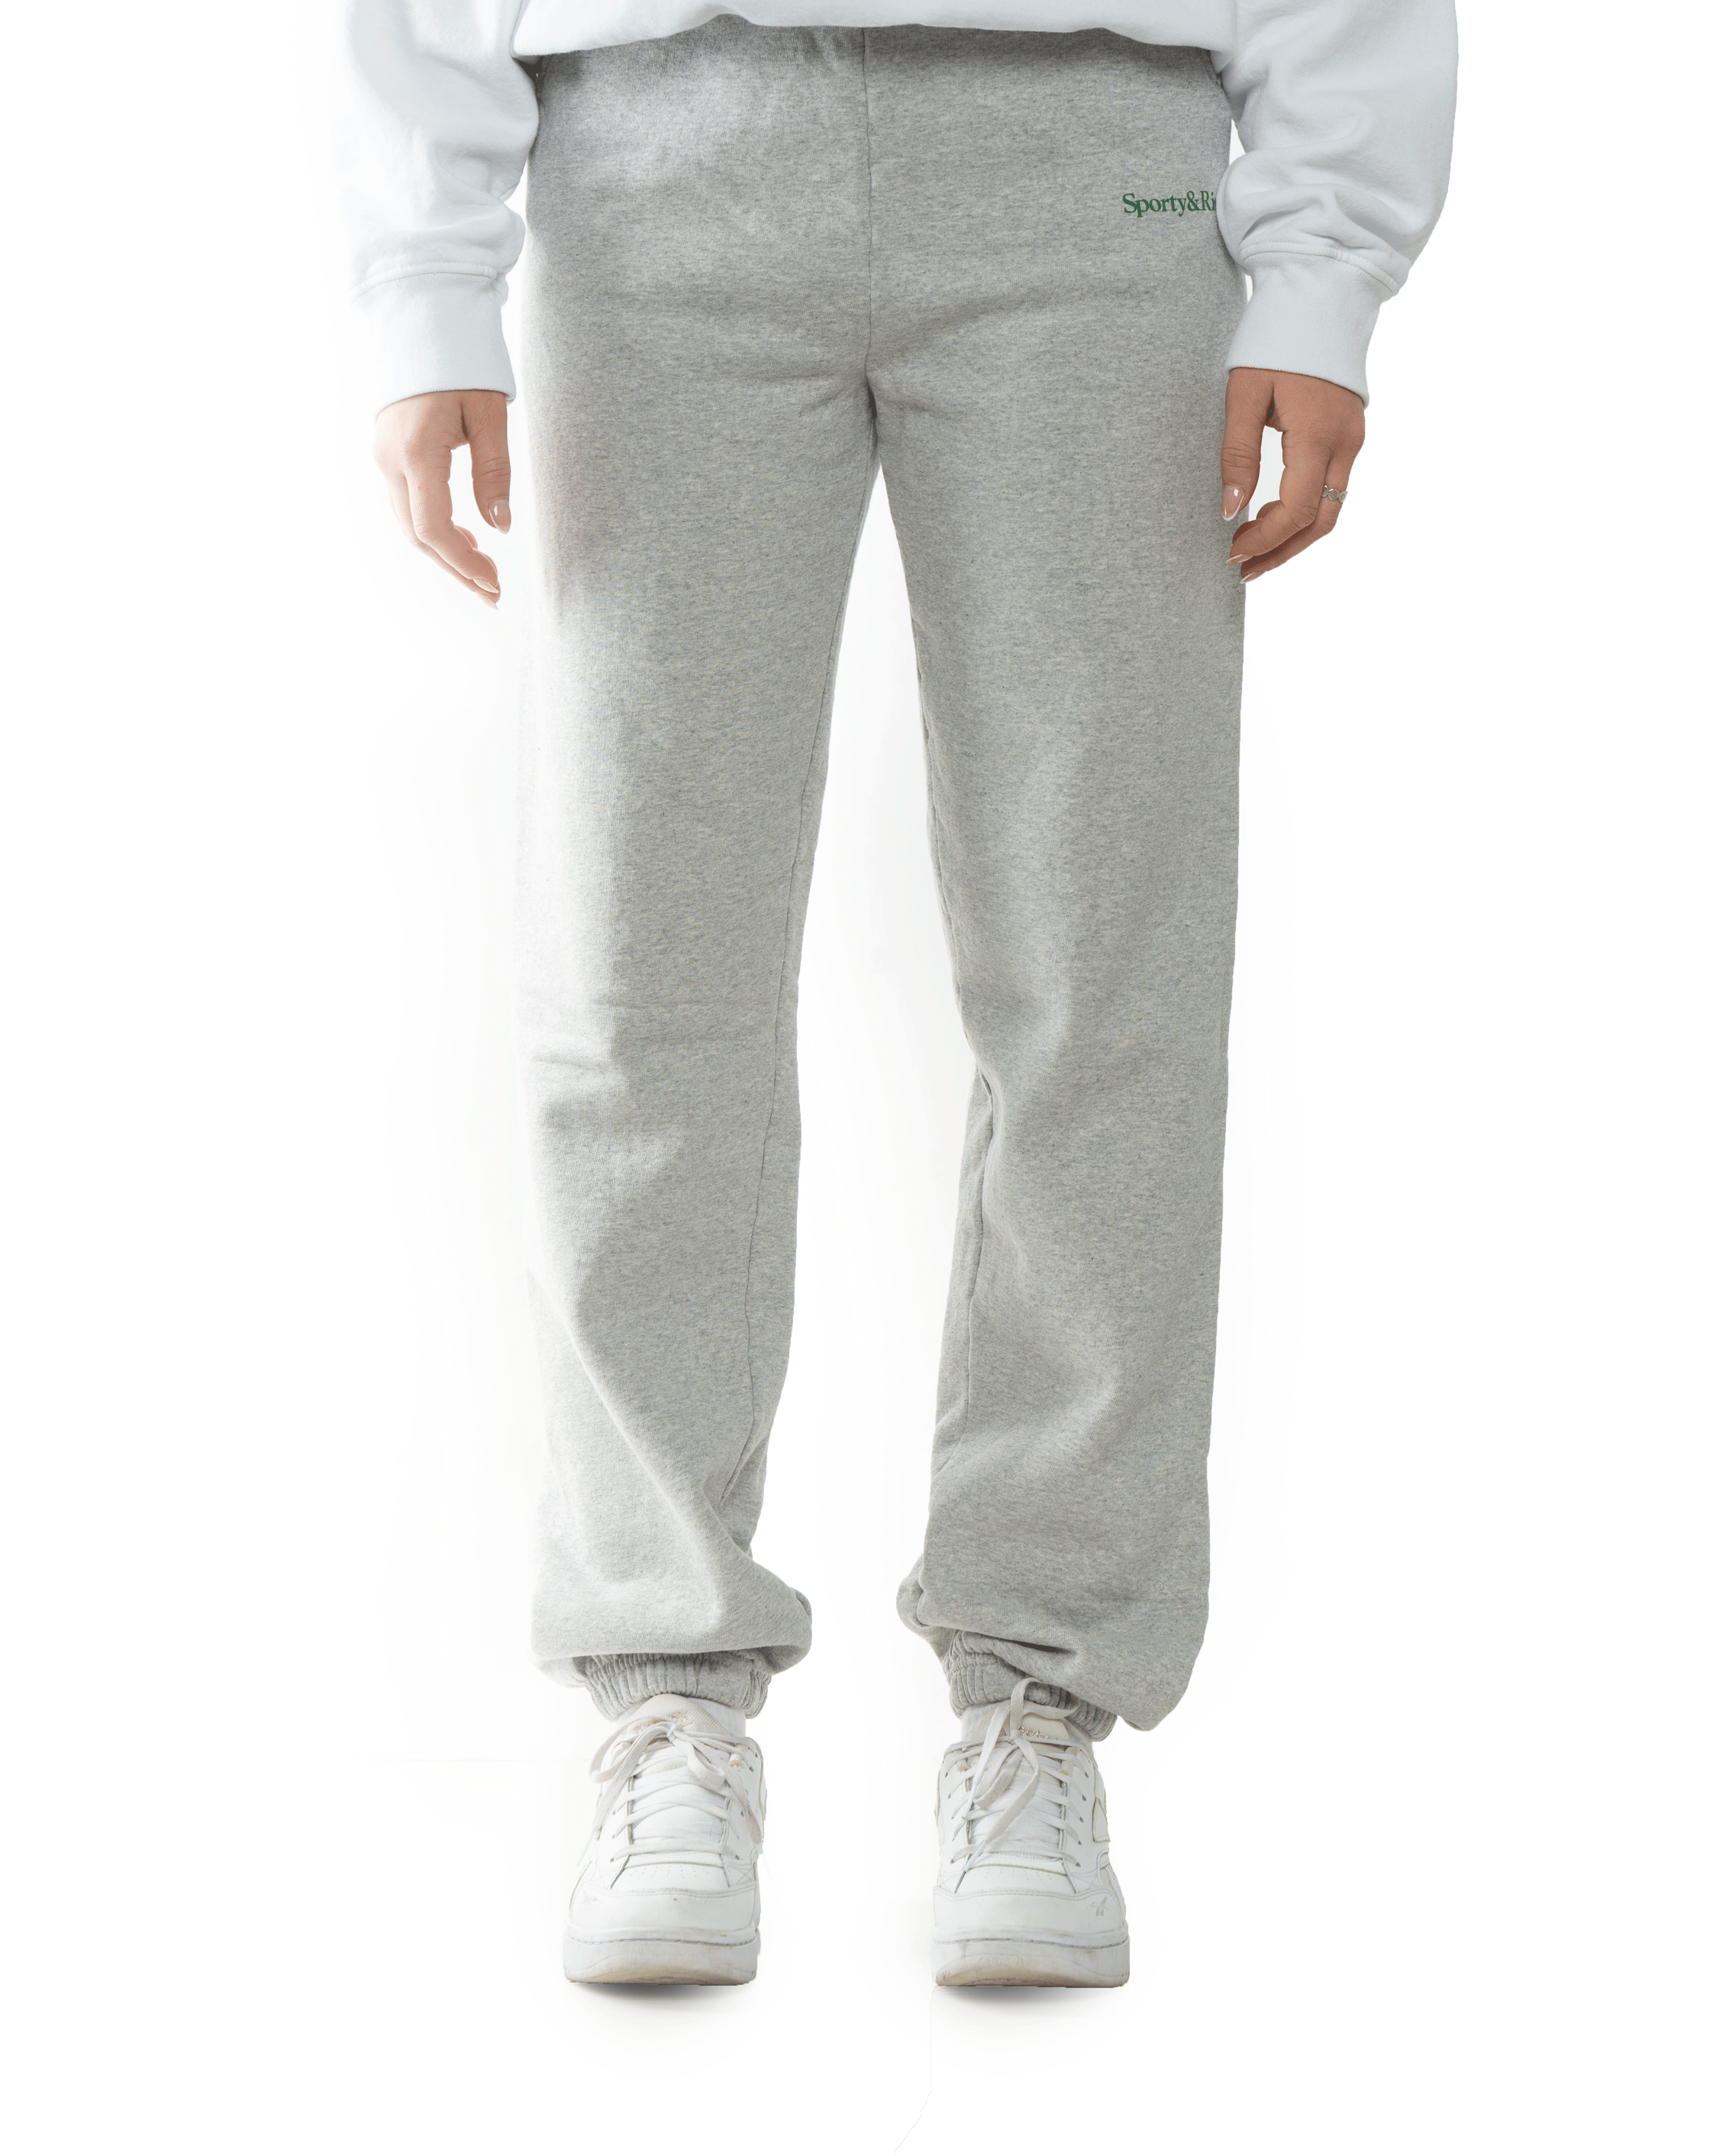 Sporty and Rich Move Your Body Sweatpants Heather Grey